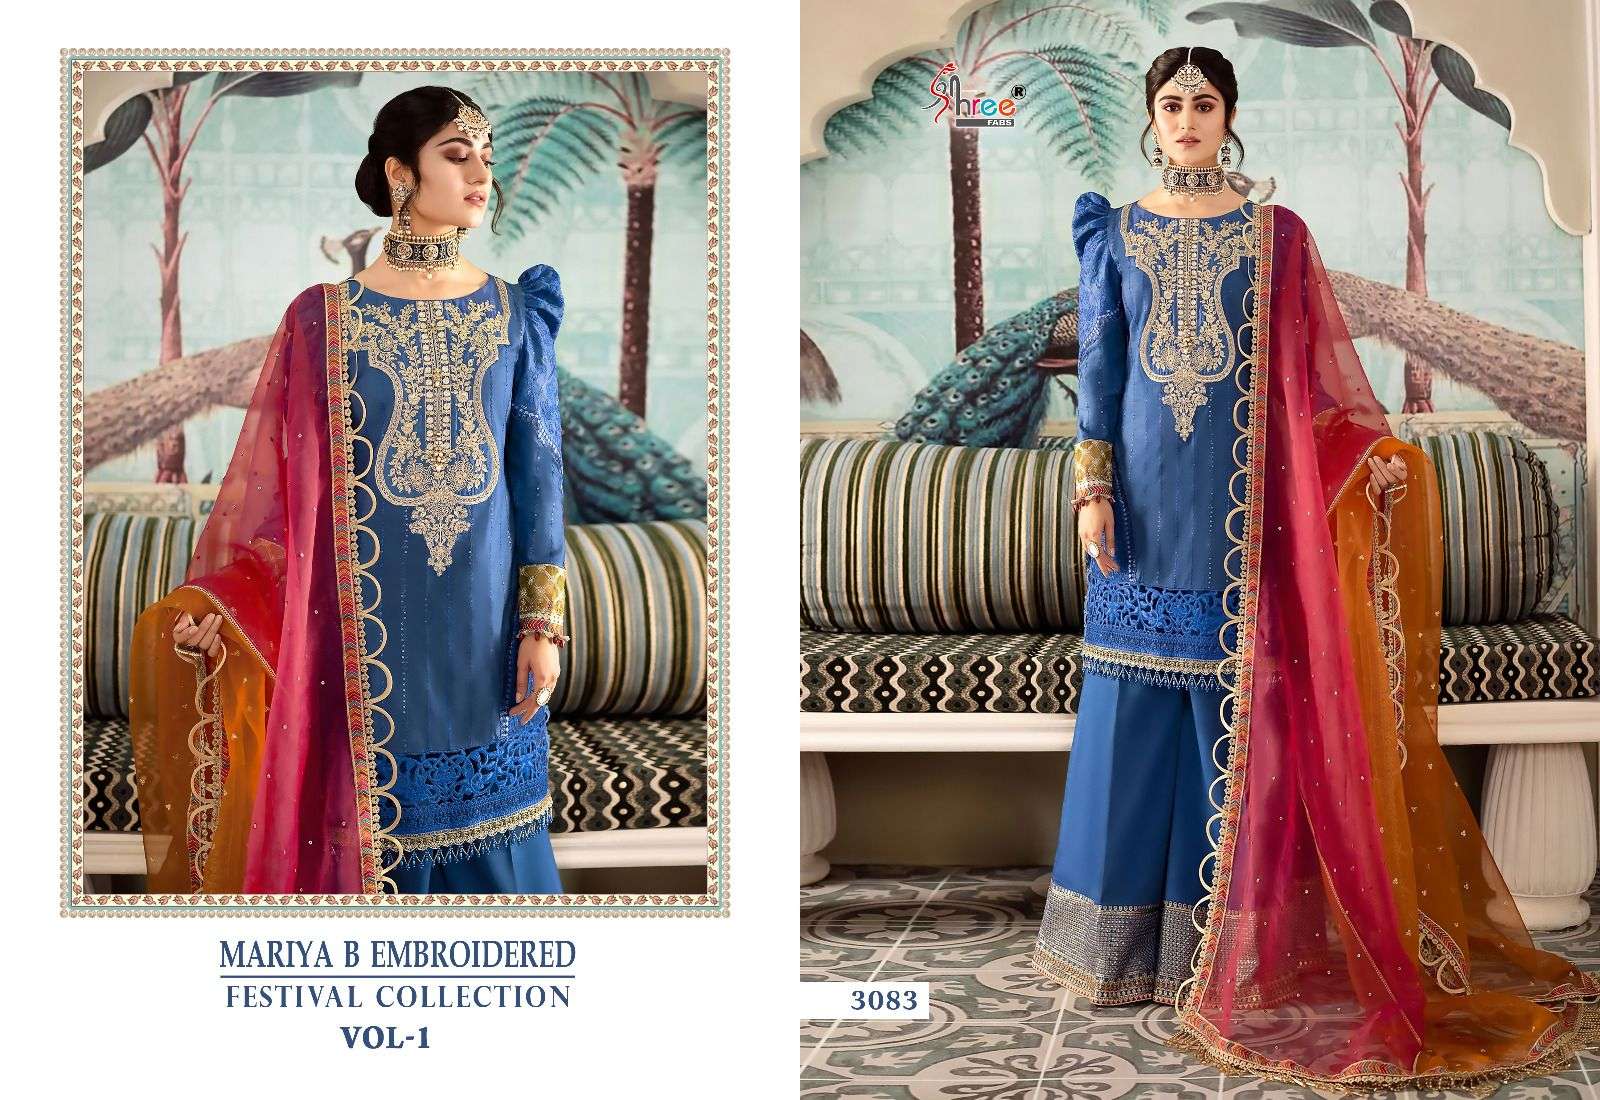 SHREE FABS MARIA B EMBROIDERED FESTIVAL COLLECTION VOL 1